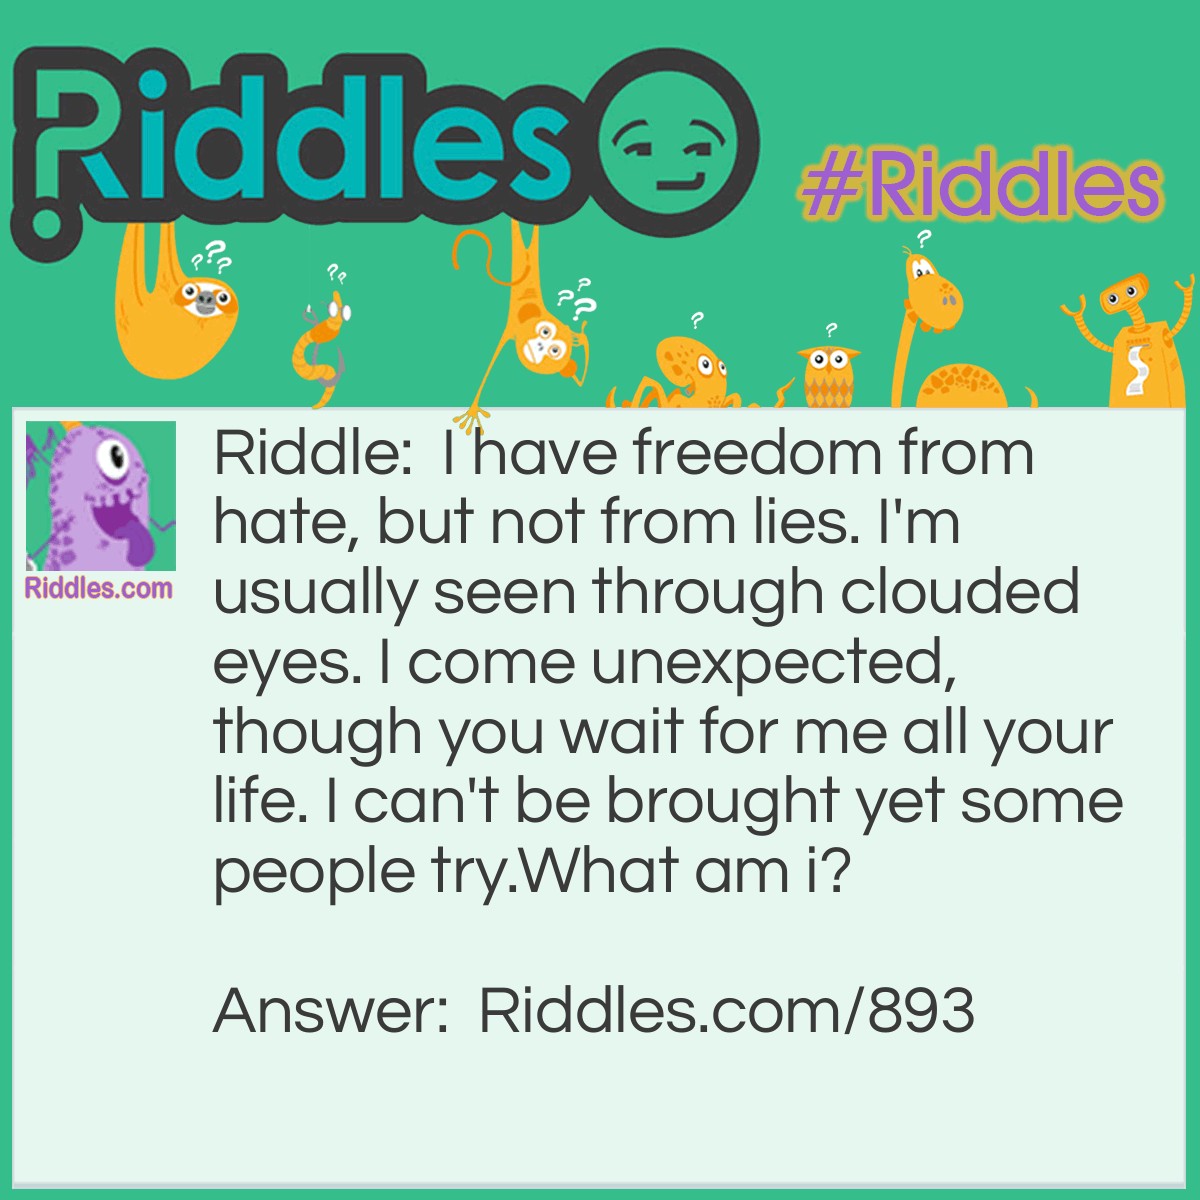 Riddle: I have freedom from hate, but not from lies. I'm usually seen through clouded eyes. I come unexpected, though you wait for me all your life. I can't be brought yet some people try. 
What am I? Answer: I am true love.